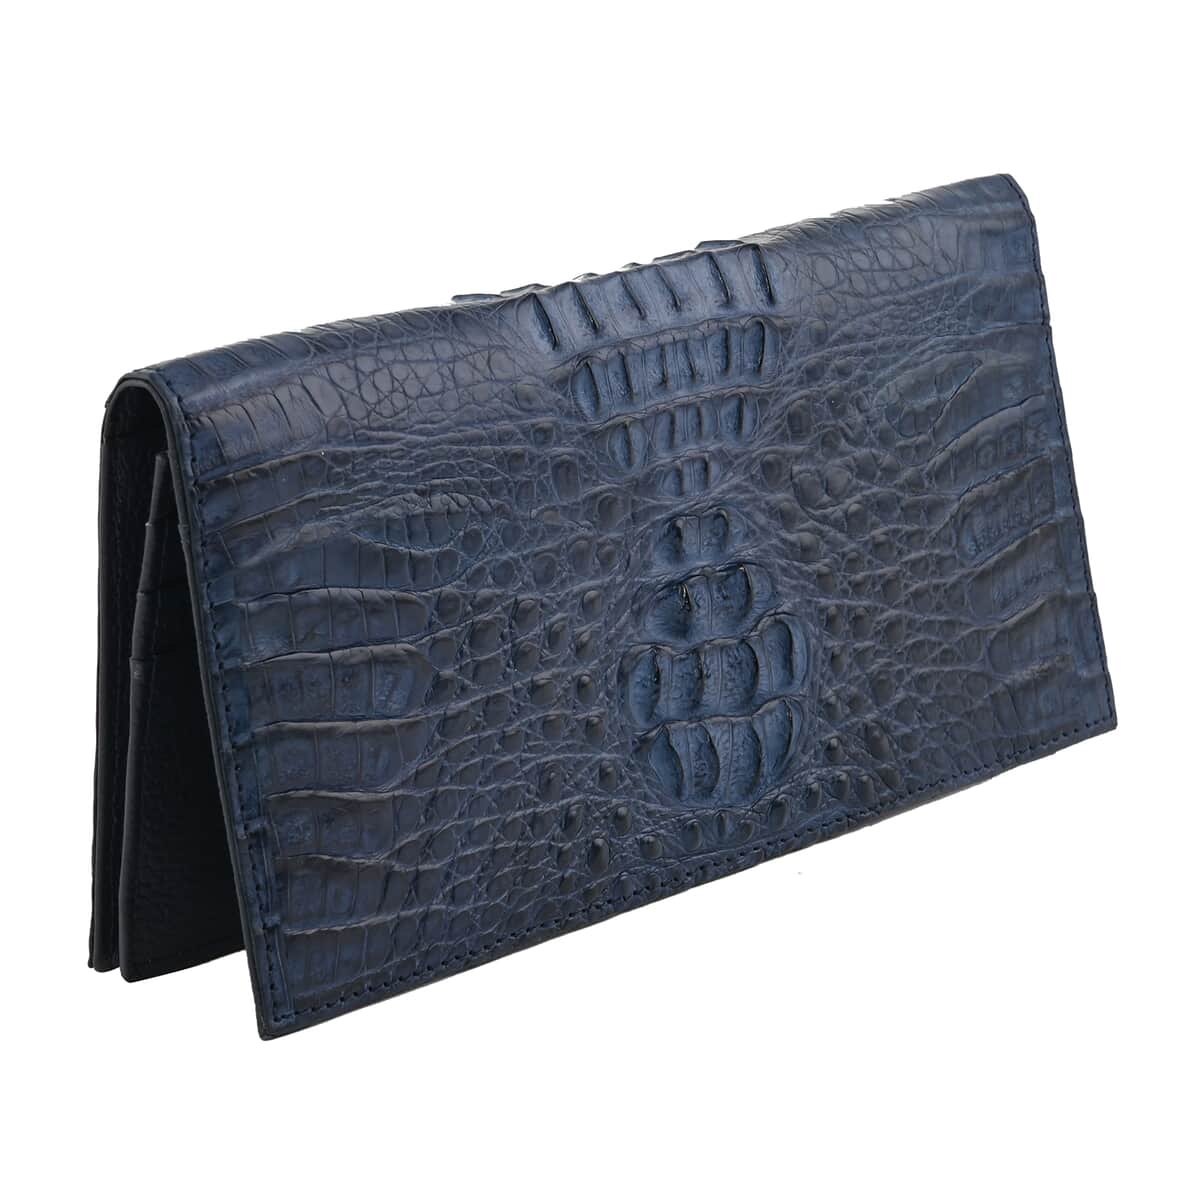 RIVER Brand Closeout, Organic Caiman Crocodile Navy Blue Clutch image number 4